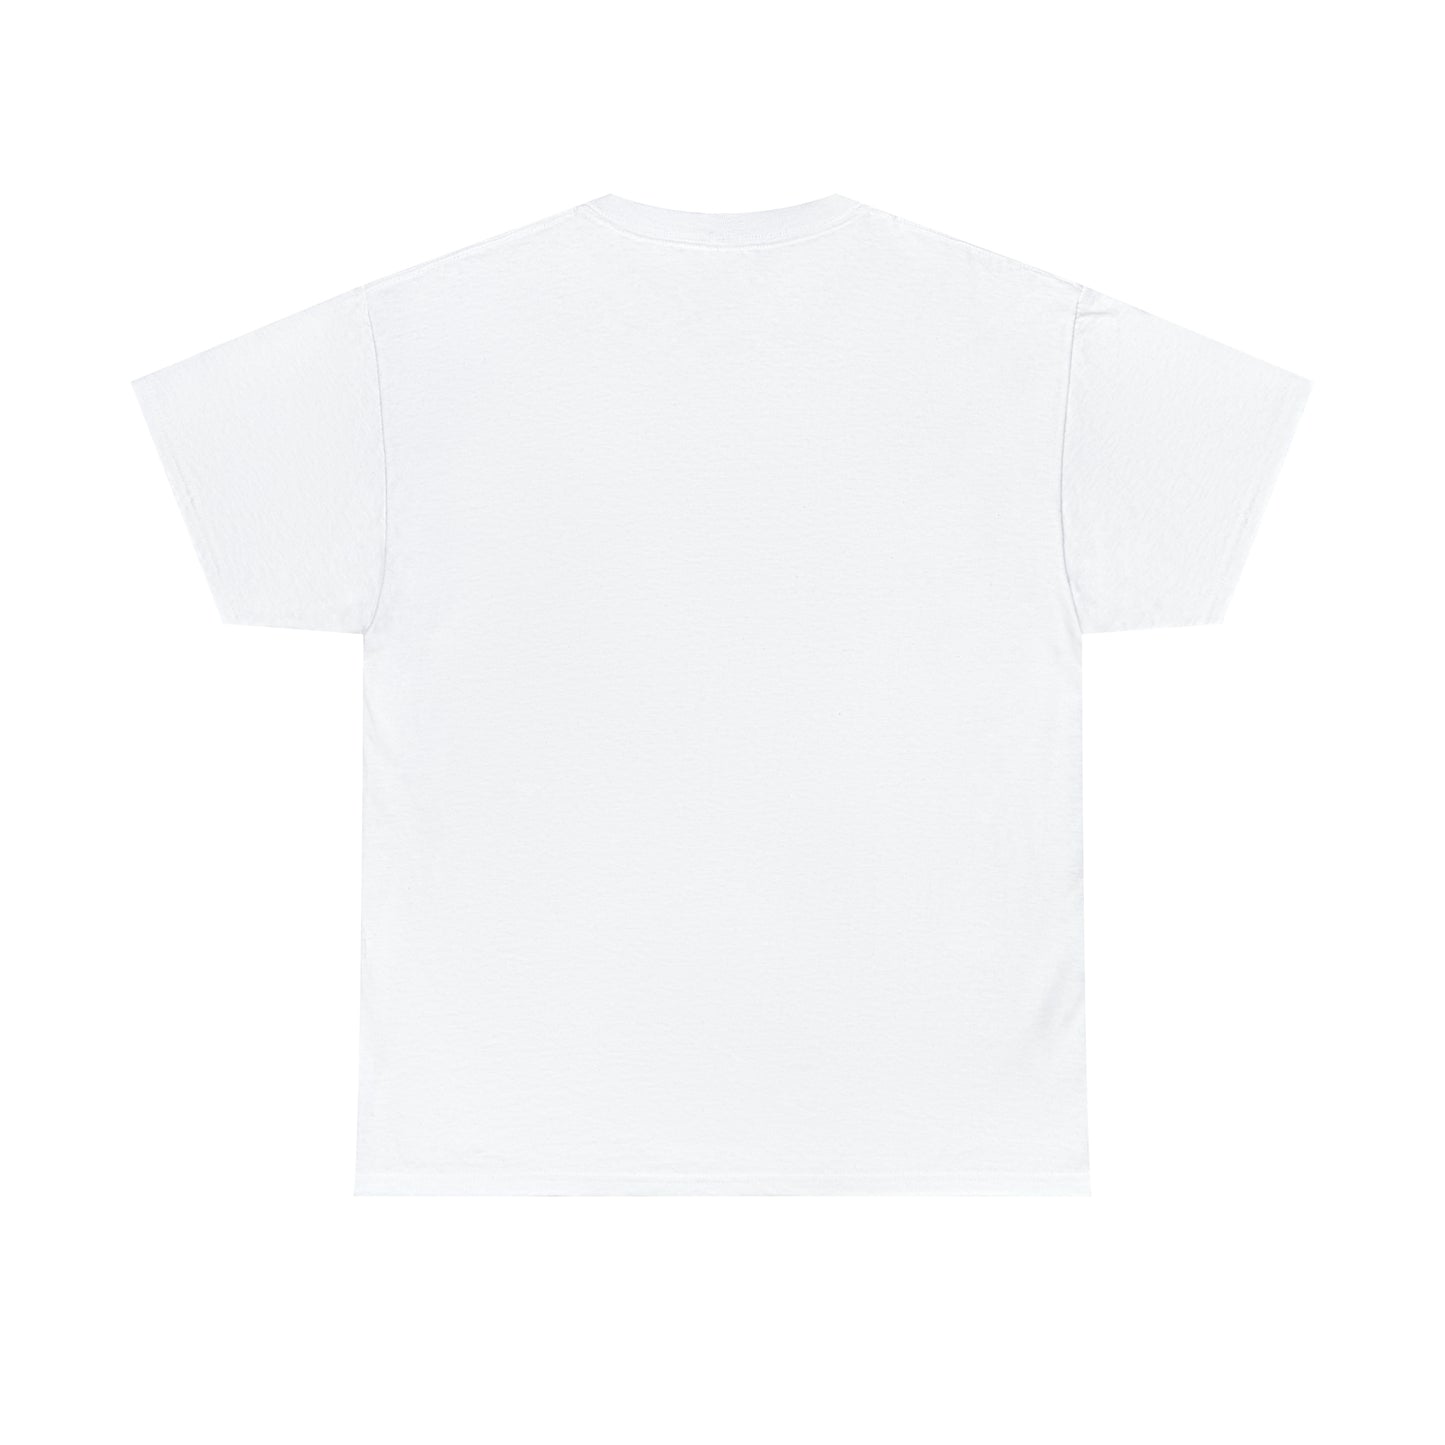 Work it out - Unisex Heavy Cotton Tee